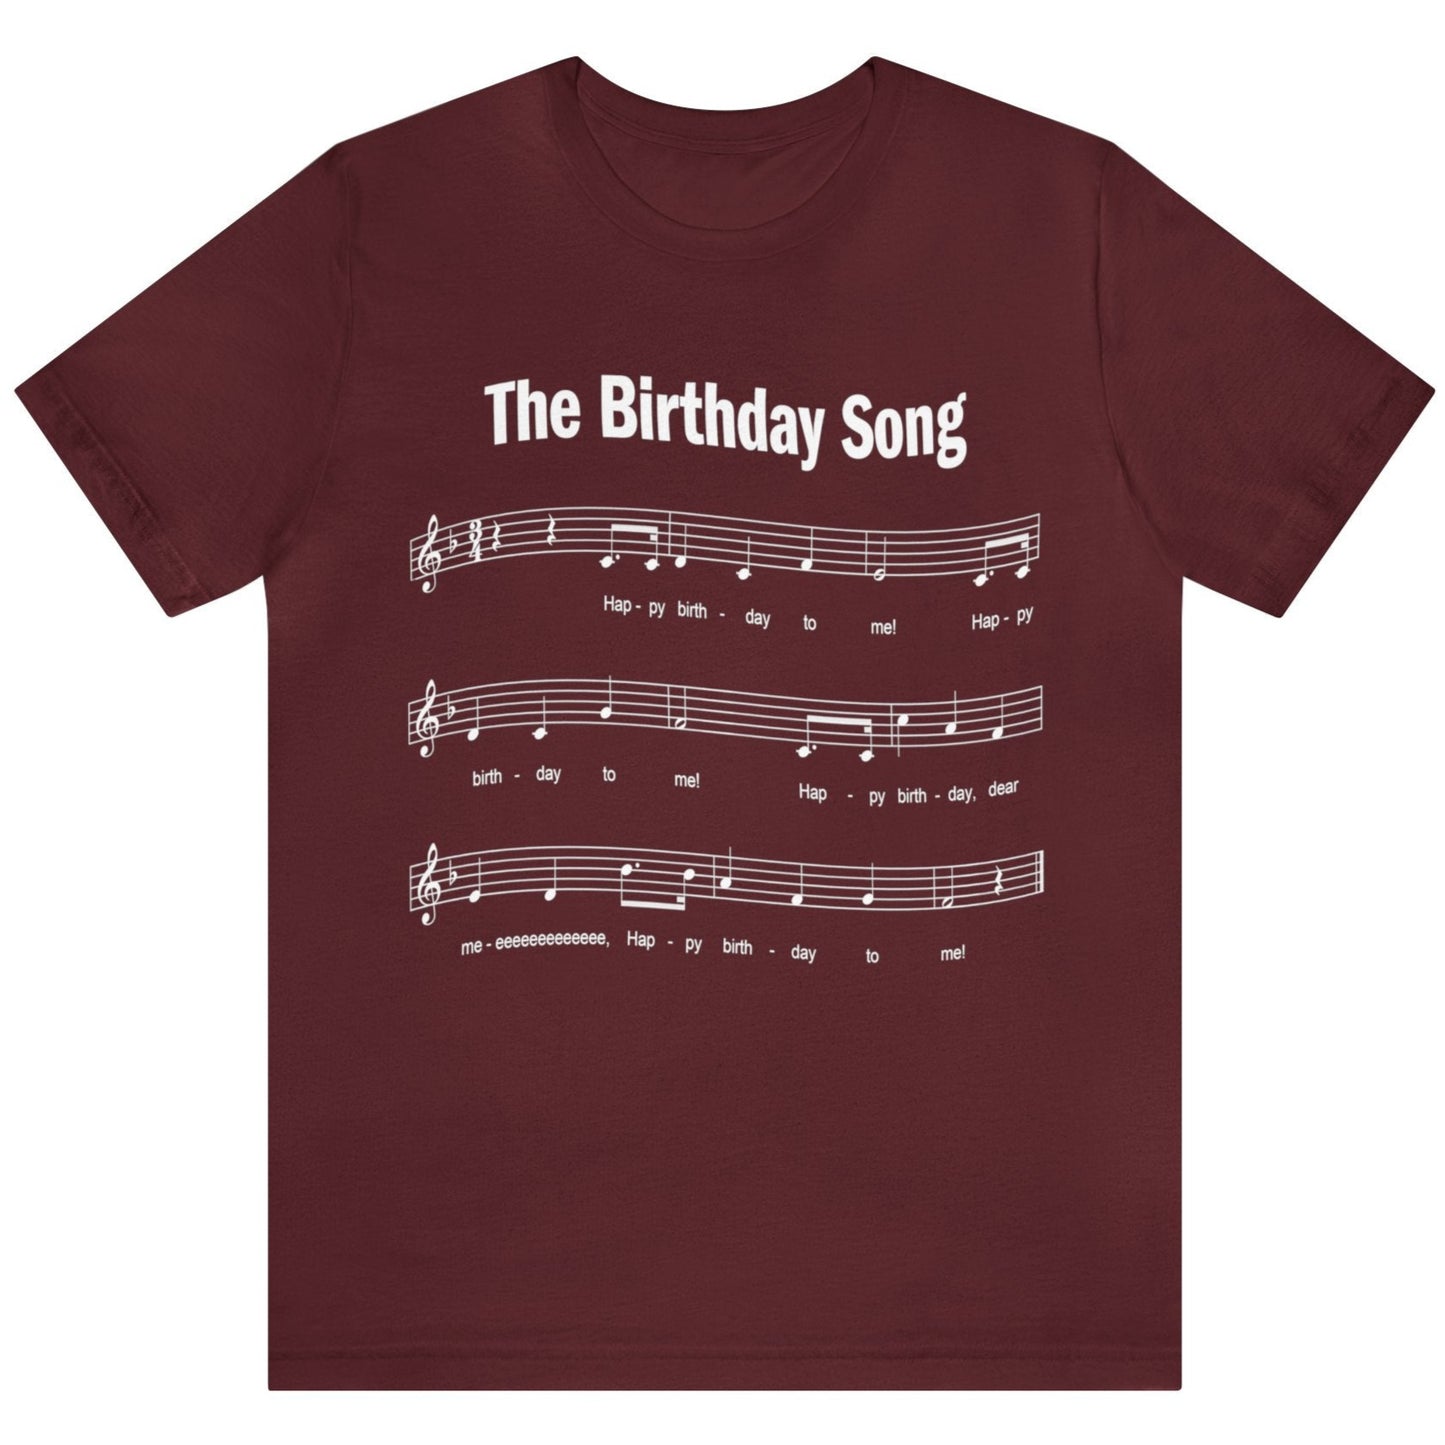 70th Birthday Gift T-shirt, Birthday Song SEVEN OH! 2-sided, Unisex Bella+Canvas 3001 T-shirt, Dark Colors, Funny Shirt for Surprise Parties